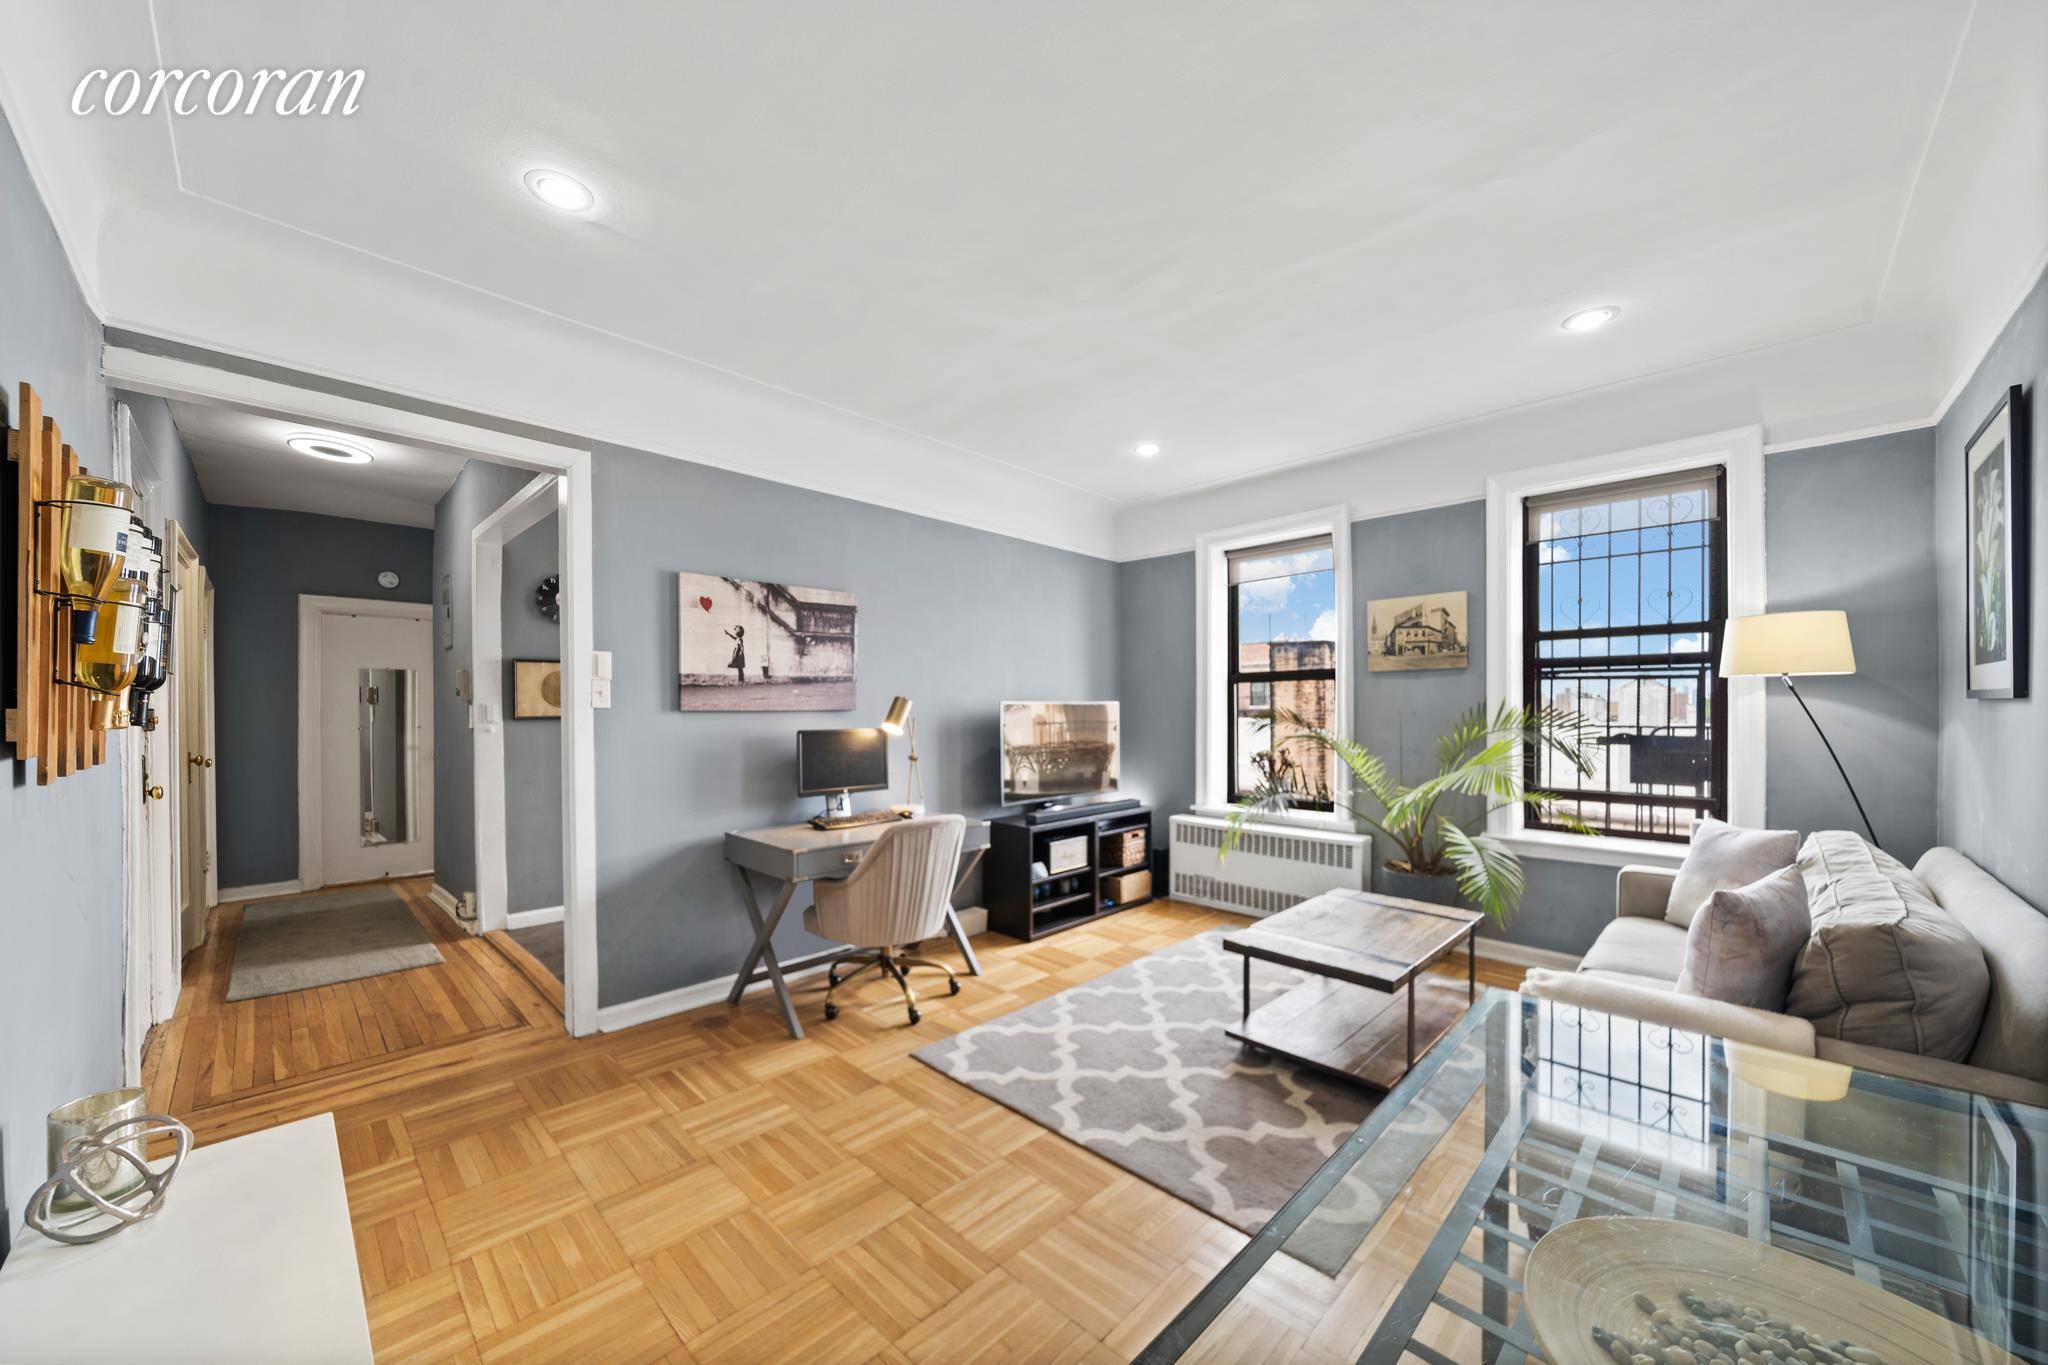 Pre warm charm meets present day necessities in this sun soaked Prospect Heights one bedroom.